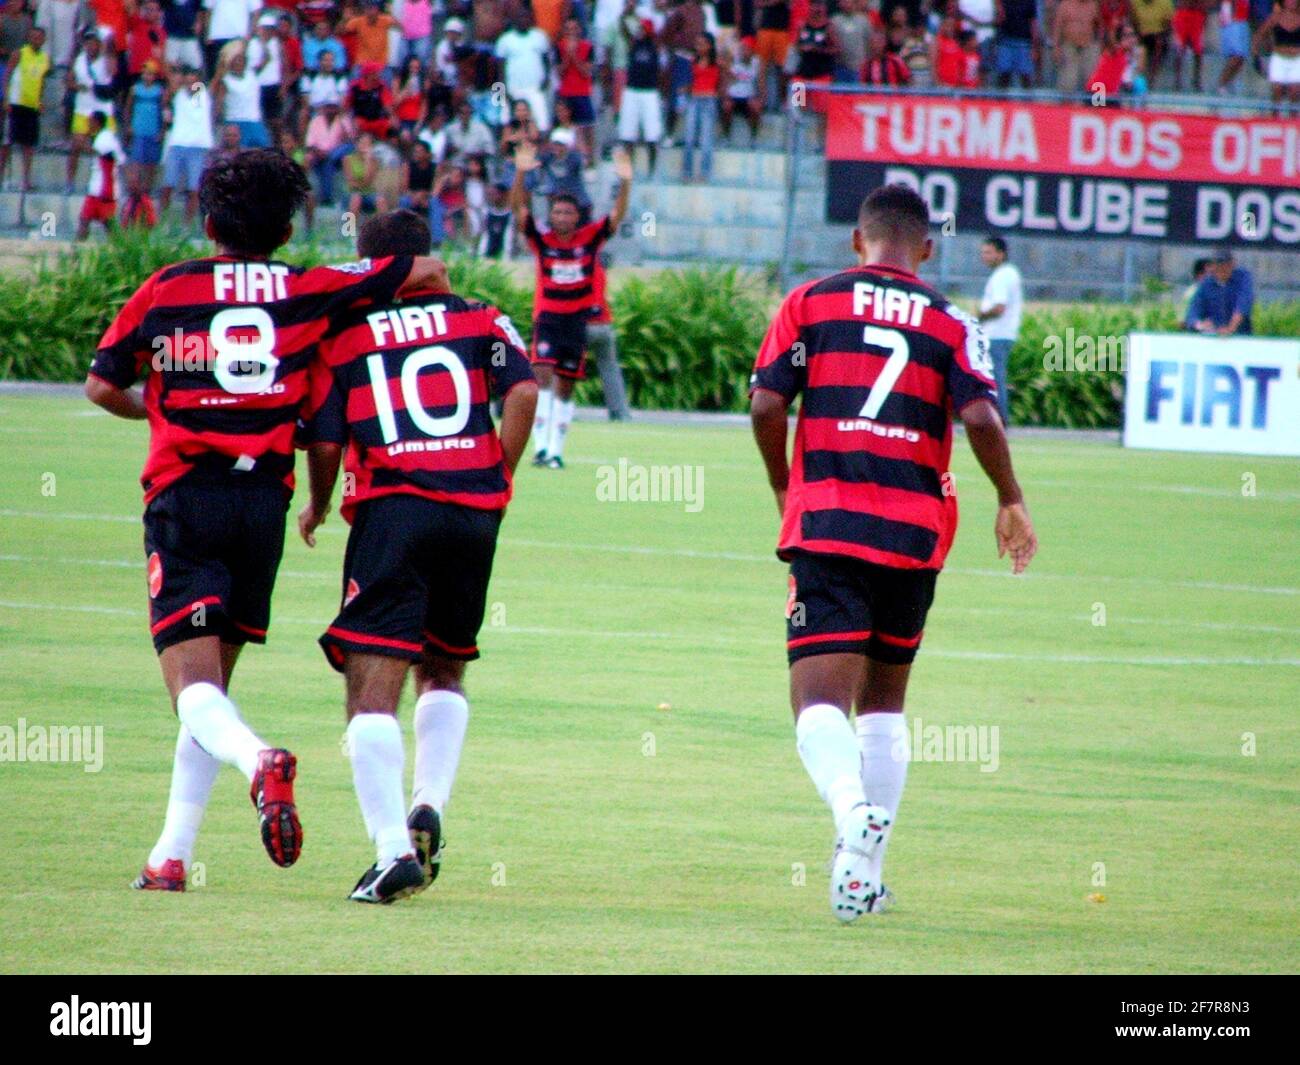 salvador, bahia / brazil - february 5, 2006: soccer players from Bahia and  Vitoria teams are seen during a match at Estadio Fonte Nova in the city of  Stock Photo - Alamy